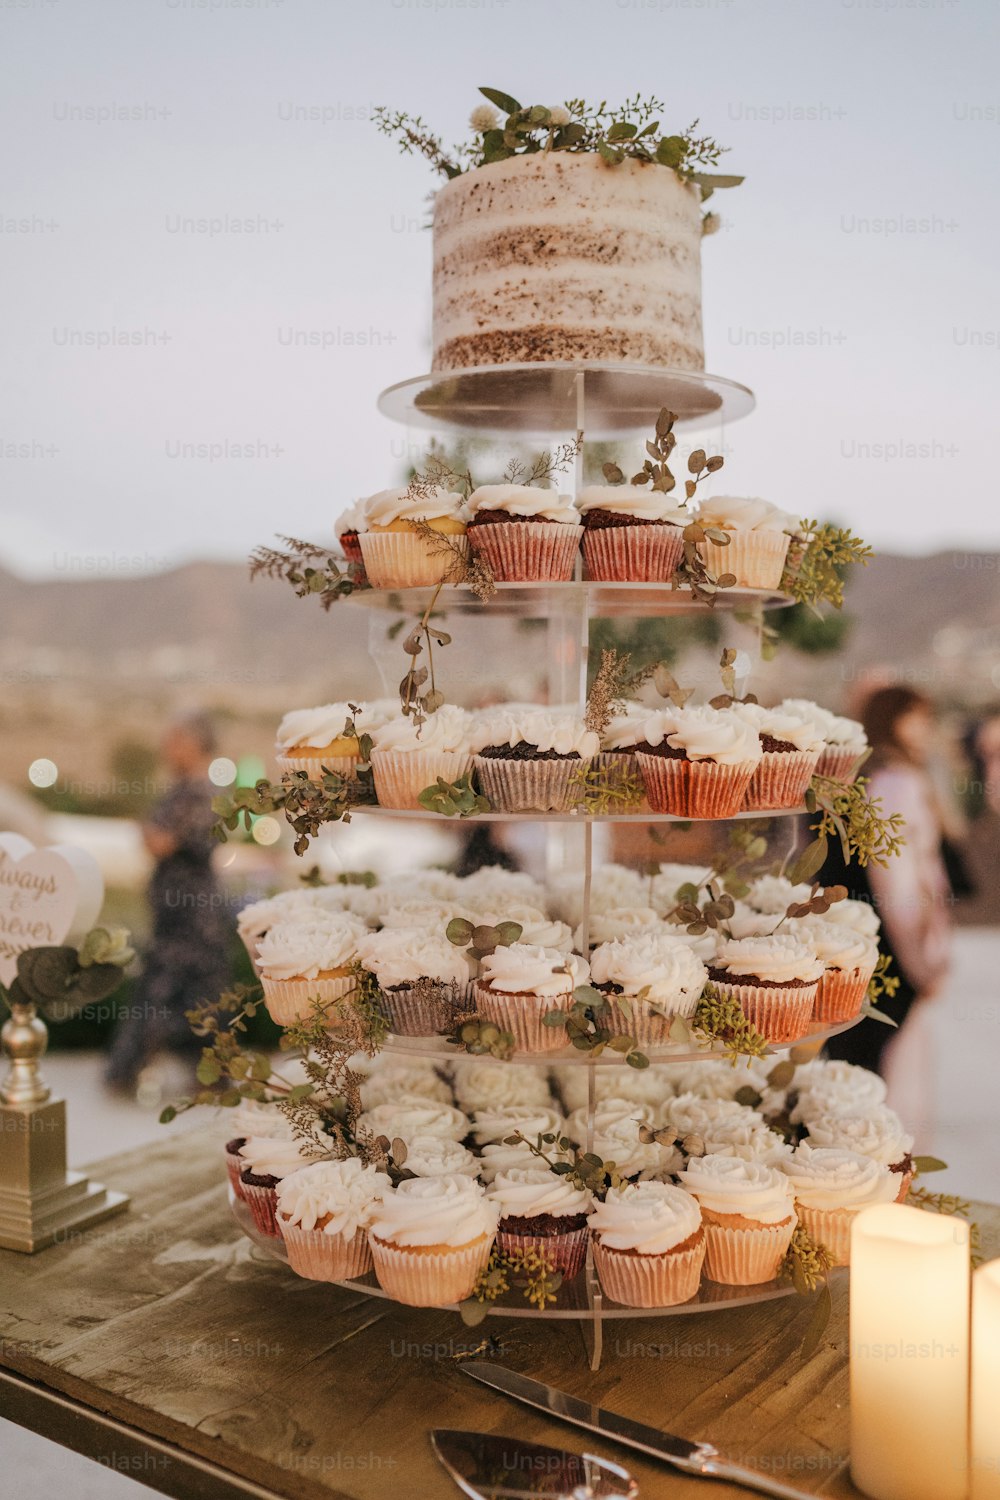 a tiered cake with cupcakes and greenery on it